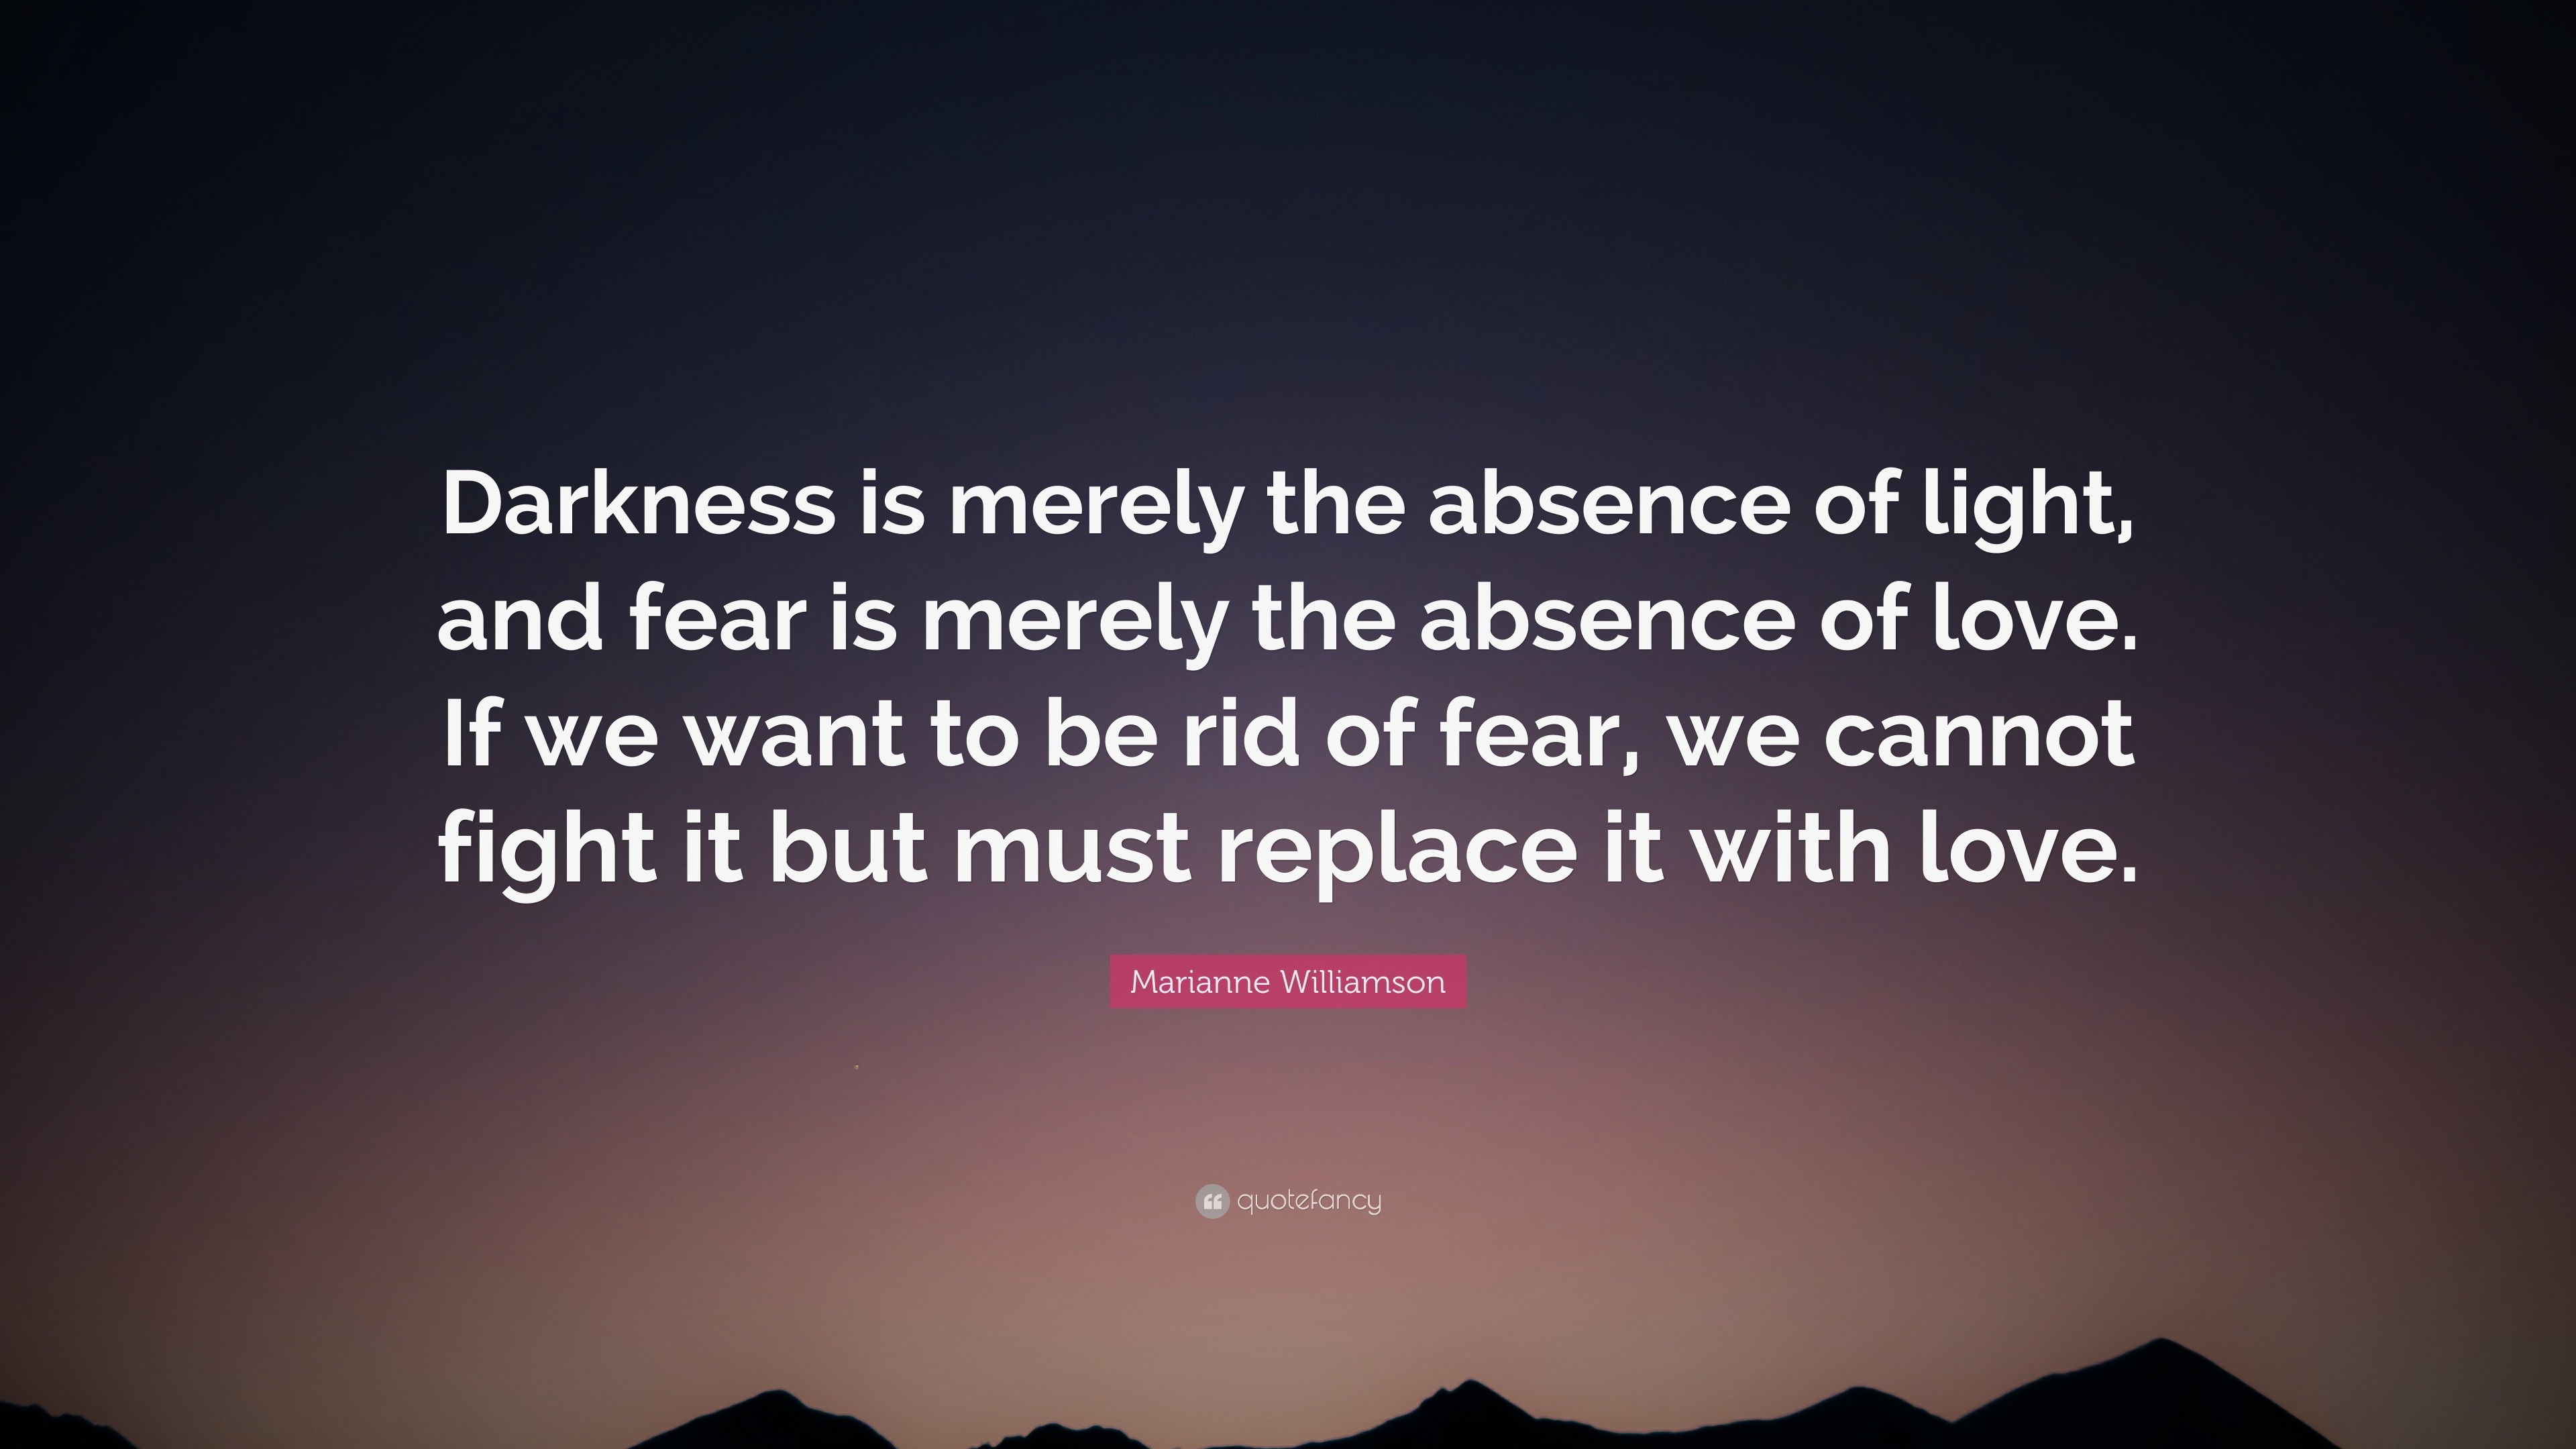 Marianne Williamson Quote Darkness Is Merely The Absence Of Light And Fear Is Merely The Absence Of Love If We Want To Be Rid Of Fear We Cannot